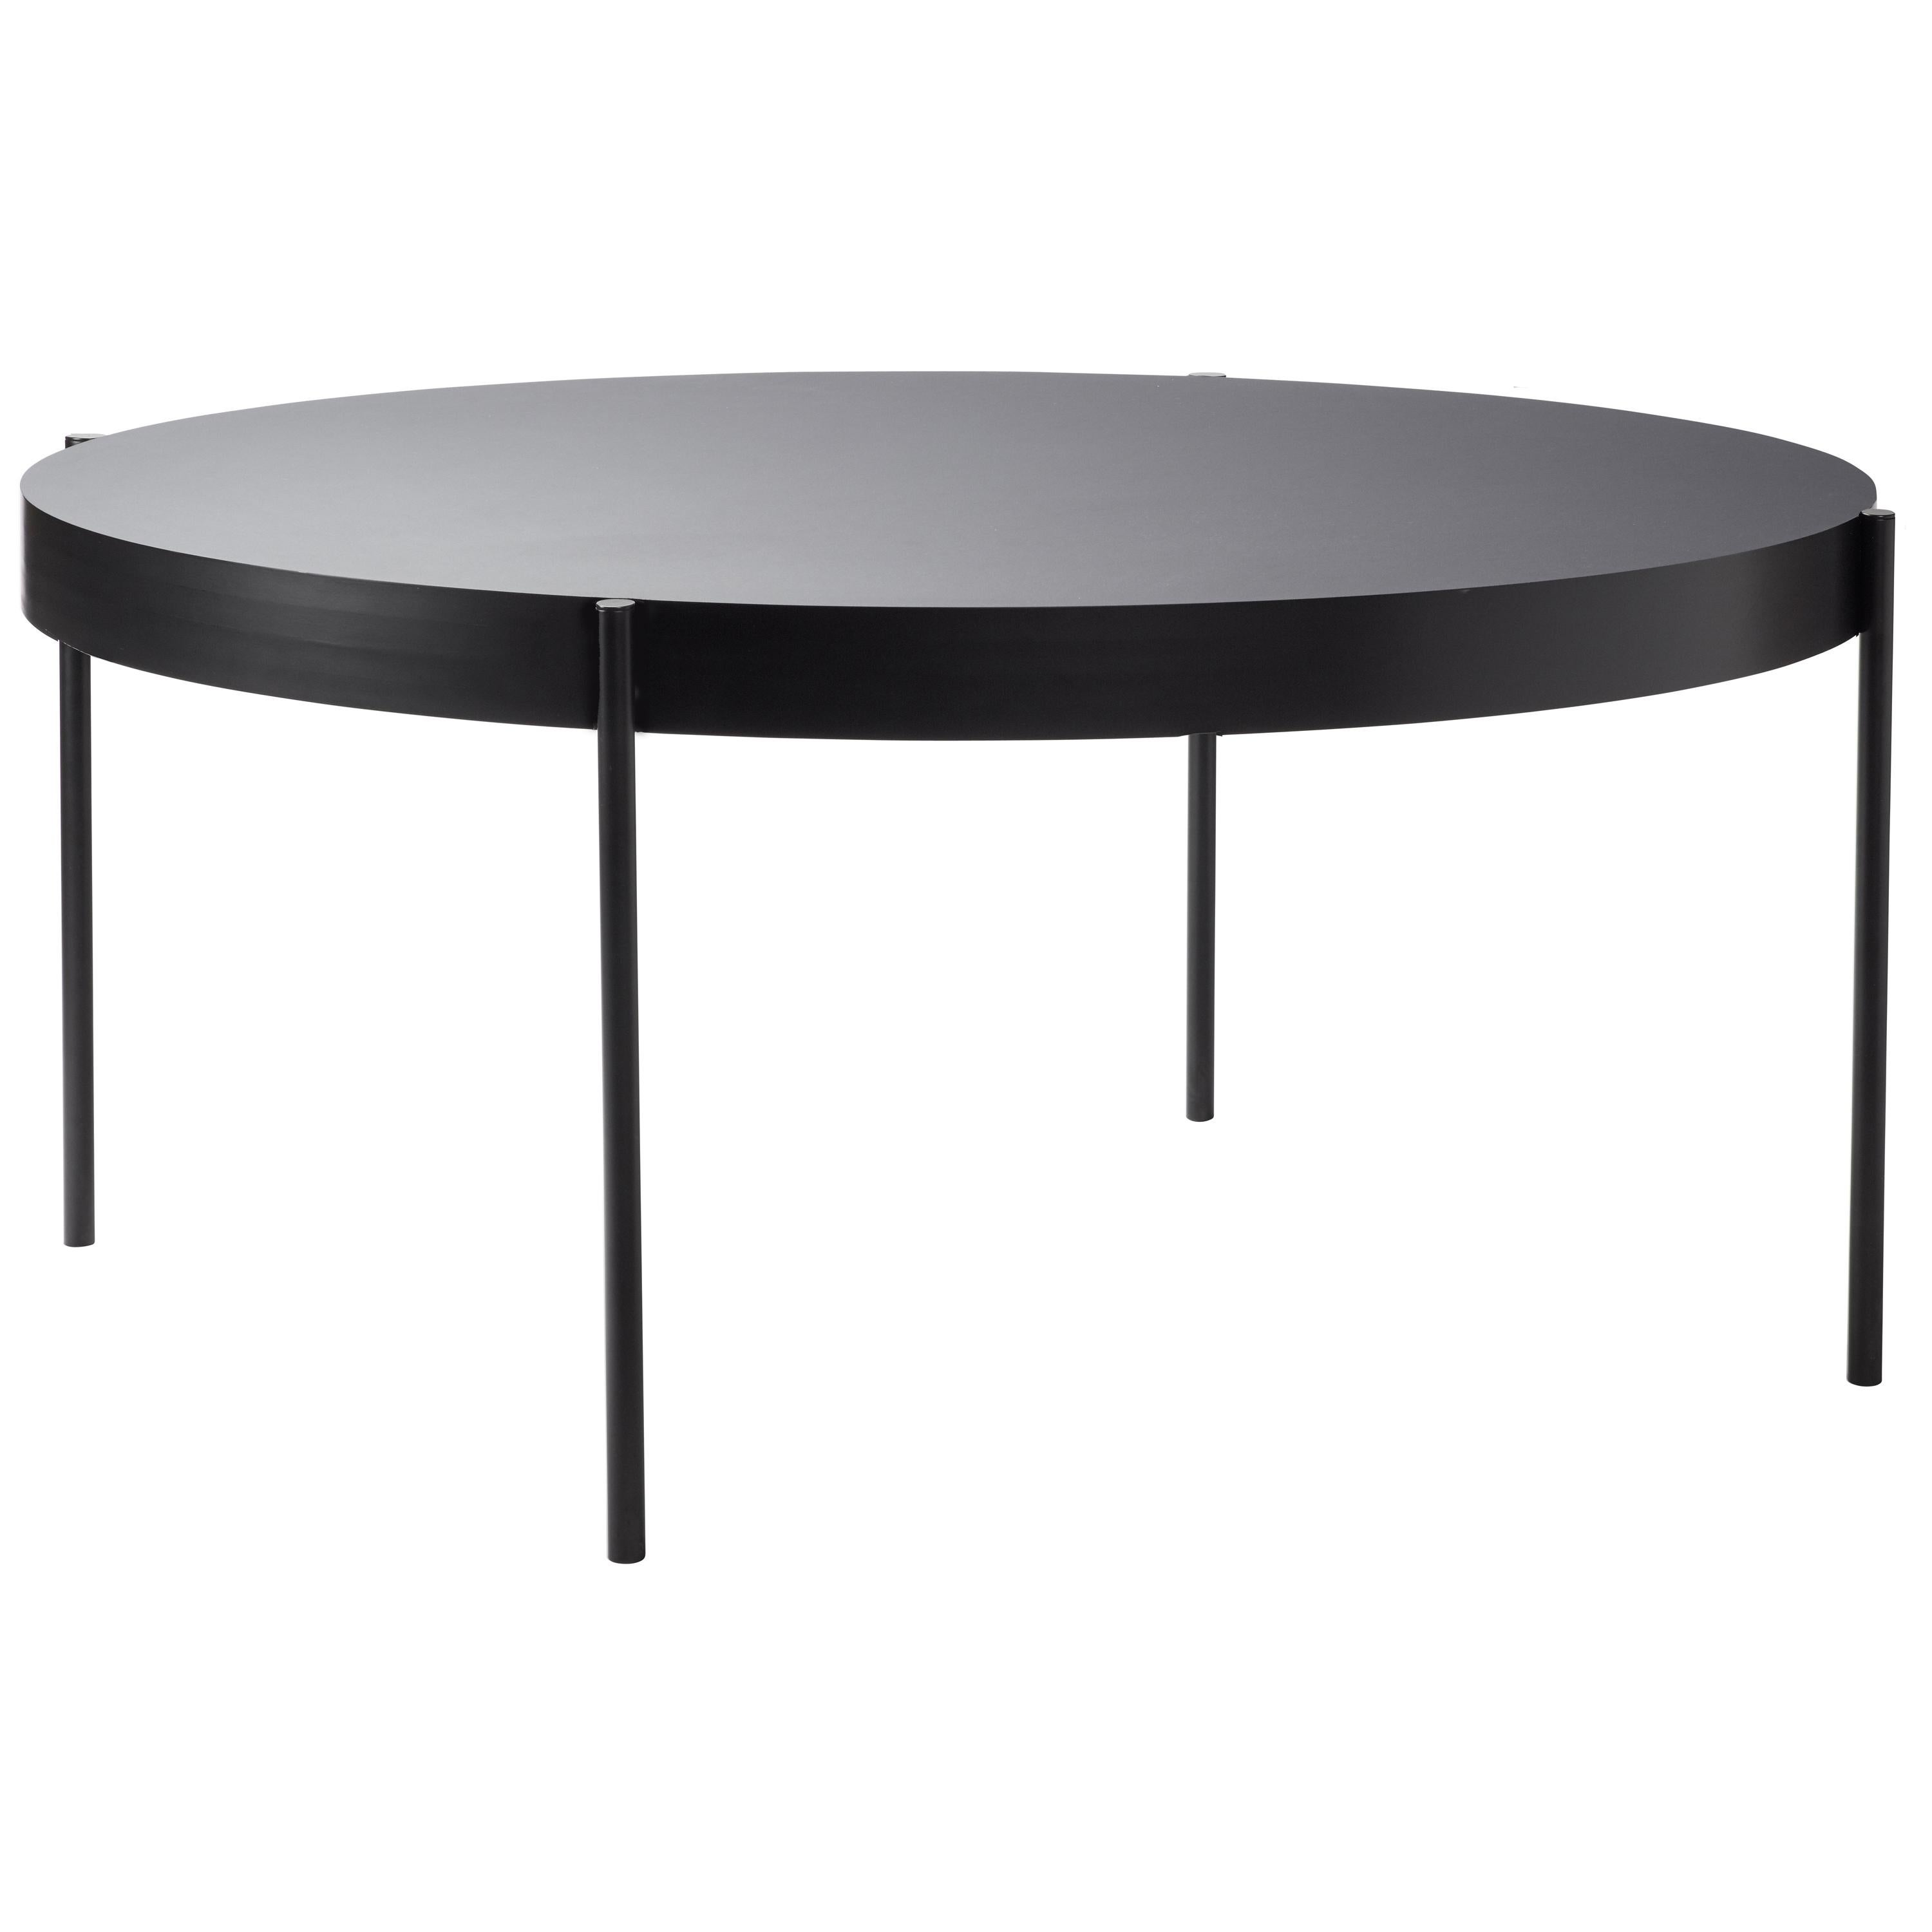 Series 430 Large Round Dining Table in Black by Verner Panton For Sale